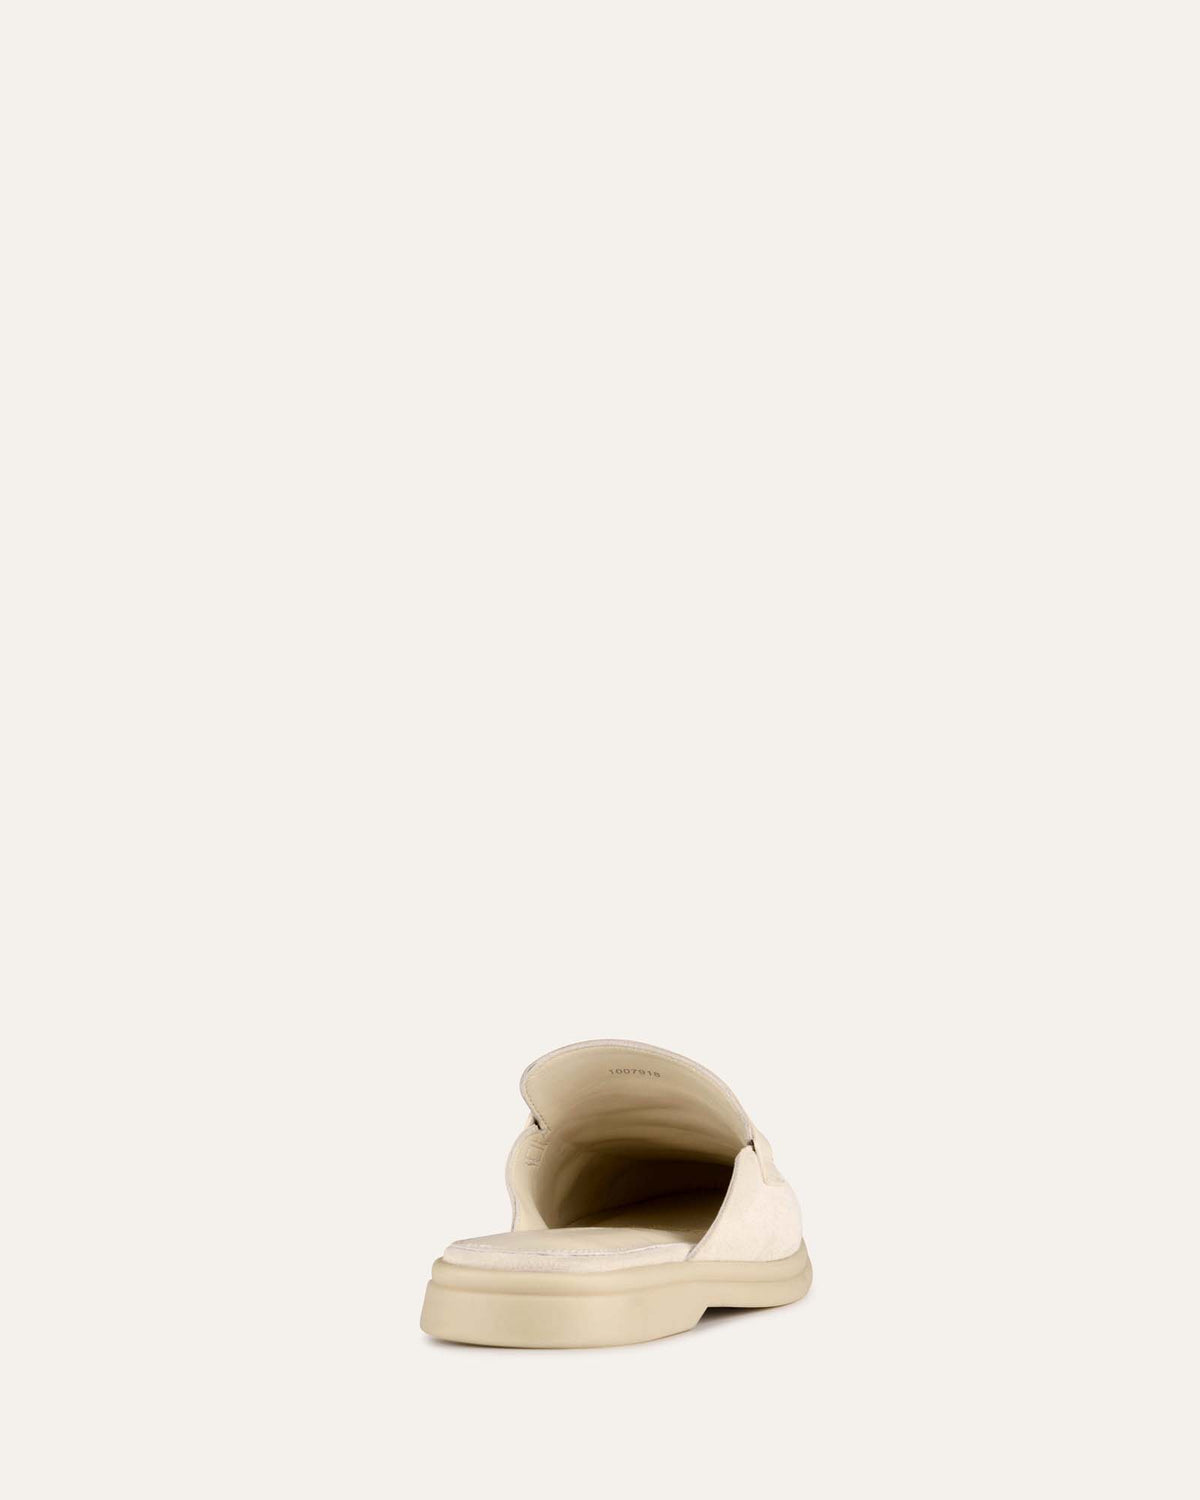 CAMBRIDGE LOAFERS SAND SUEDE